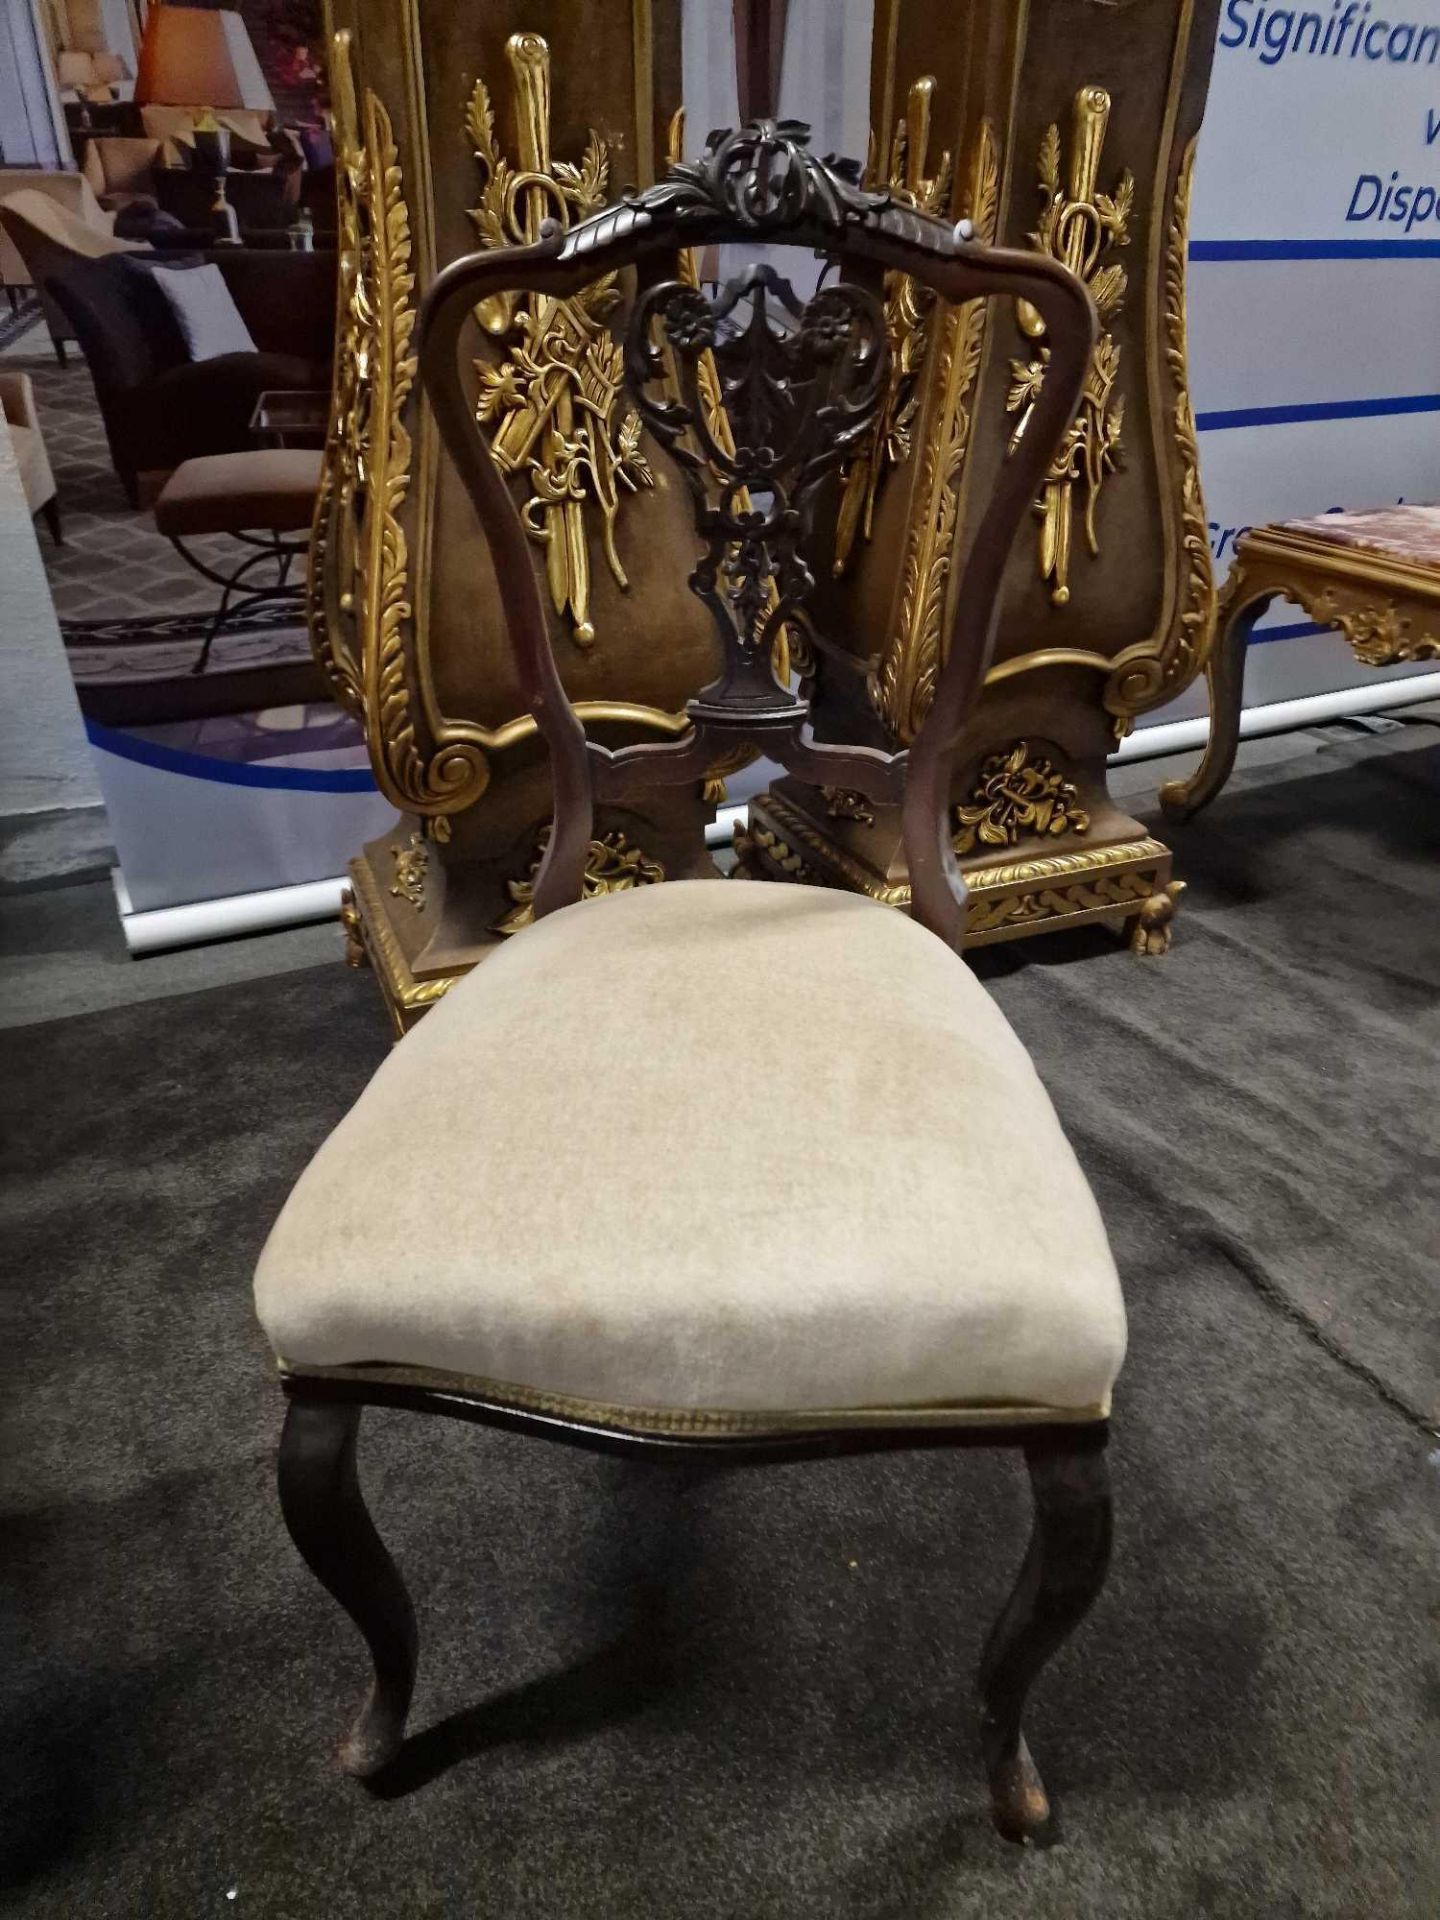 An Elegant Set of 4 Victorian Dining Chairs Elaborately Carved Top Rail And Shield Backs The Seats - Image 8 of 17